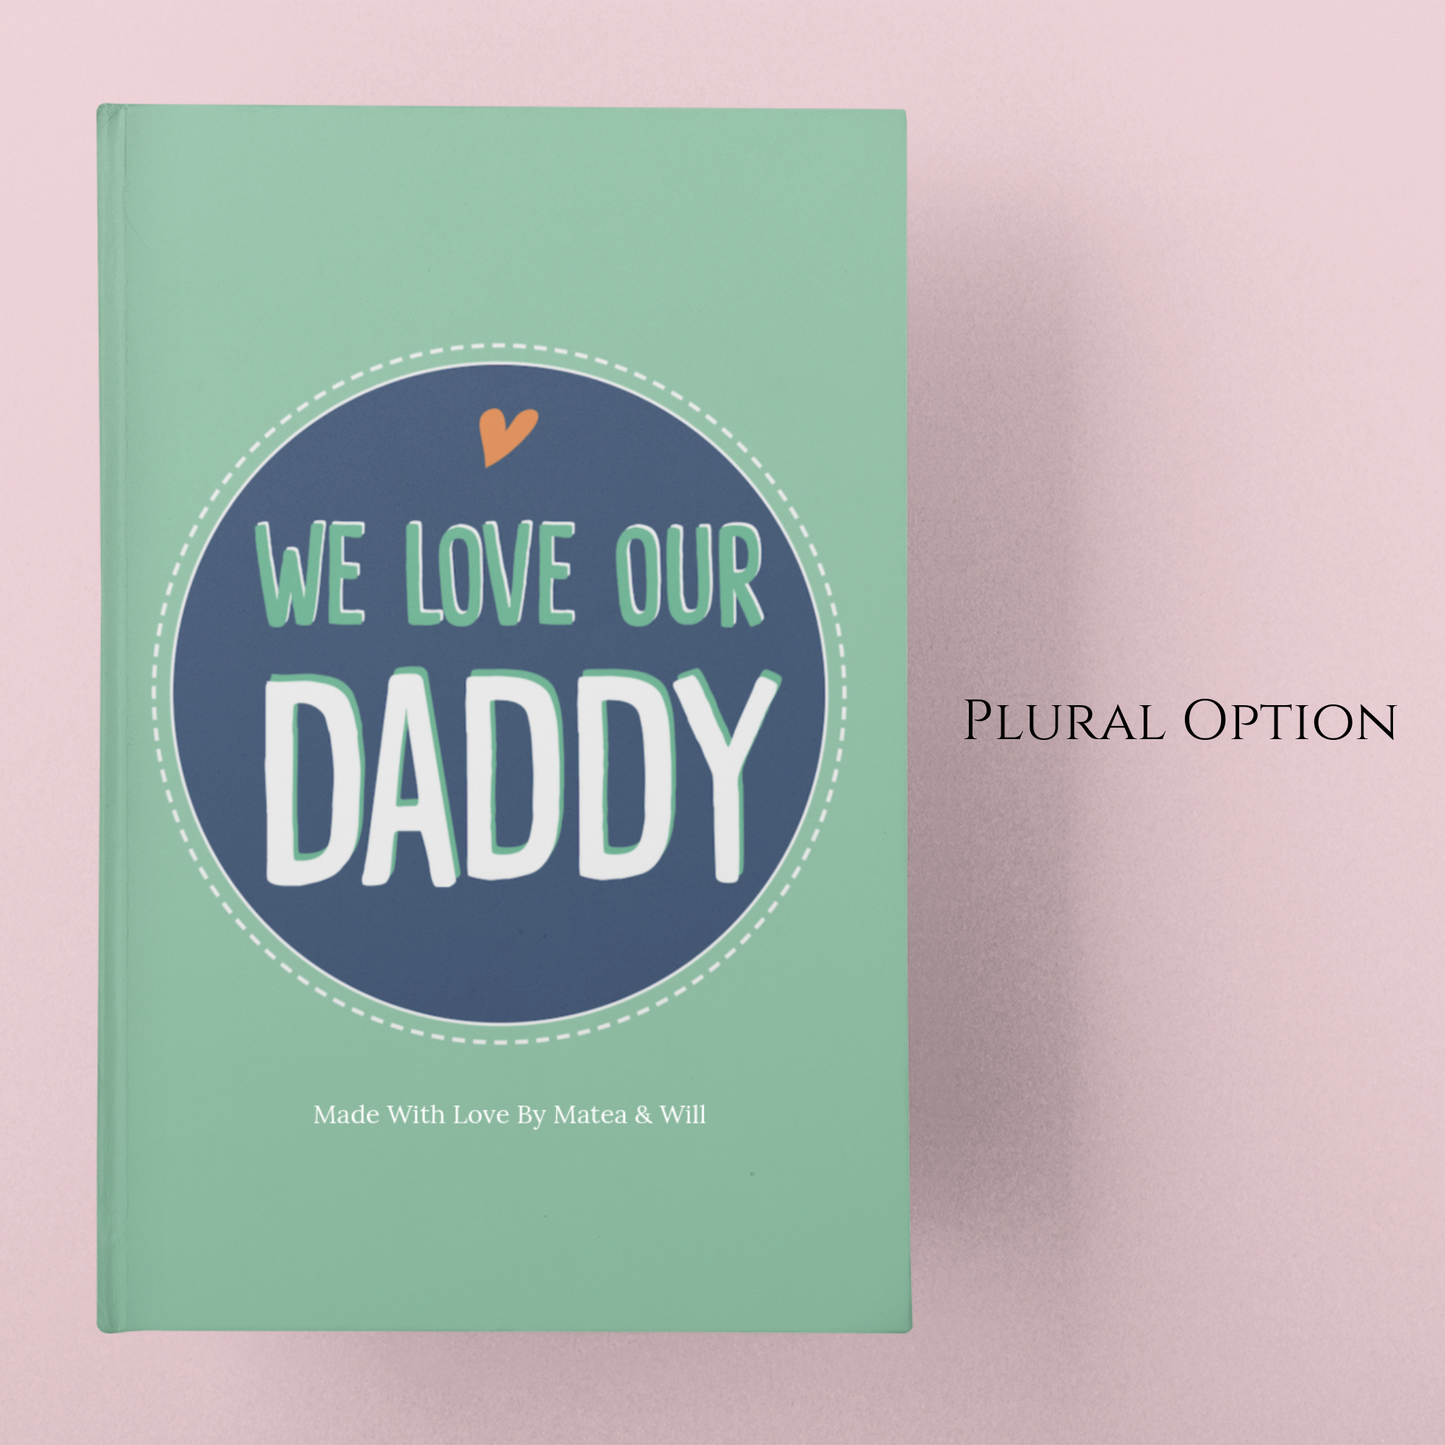 Personalized gift for dad. Gift for father from kids. Personalized Book. Fill in the blank book. Luhvee Books.